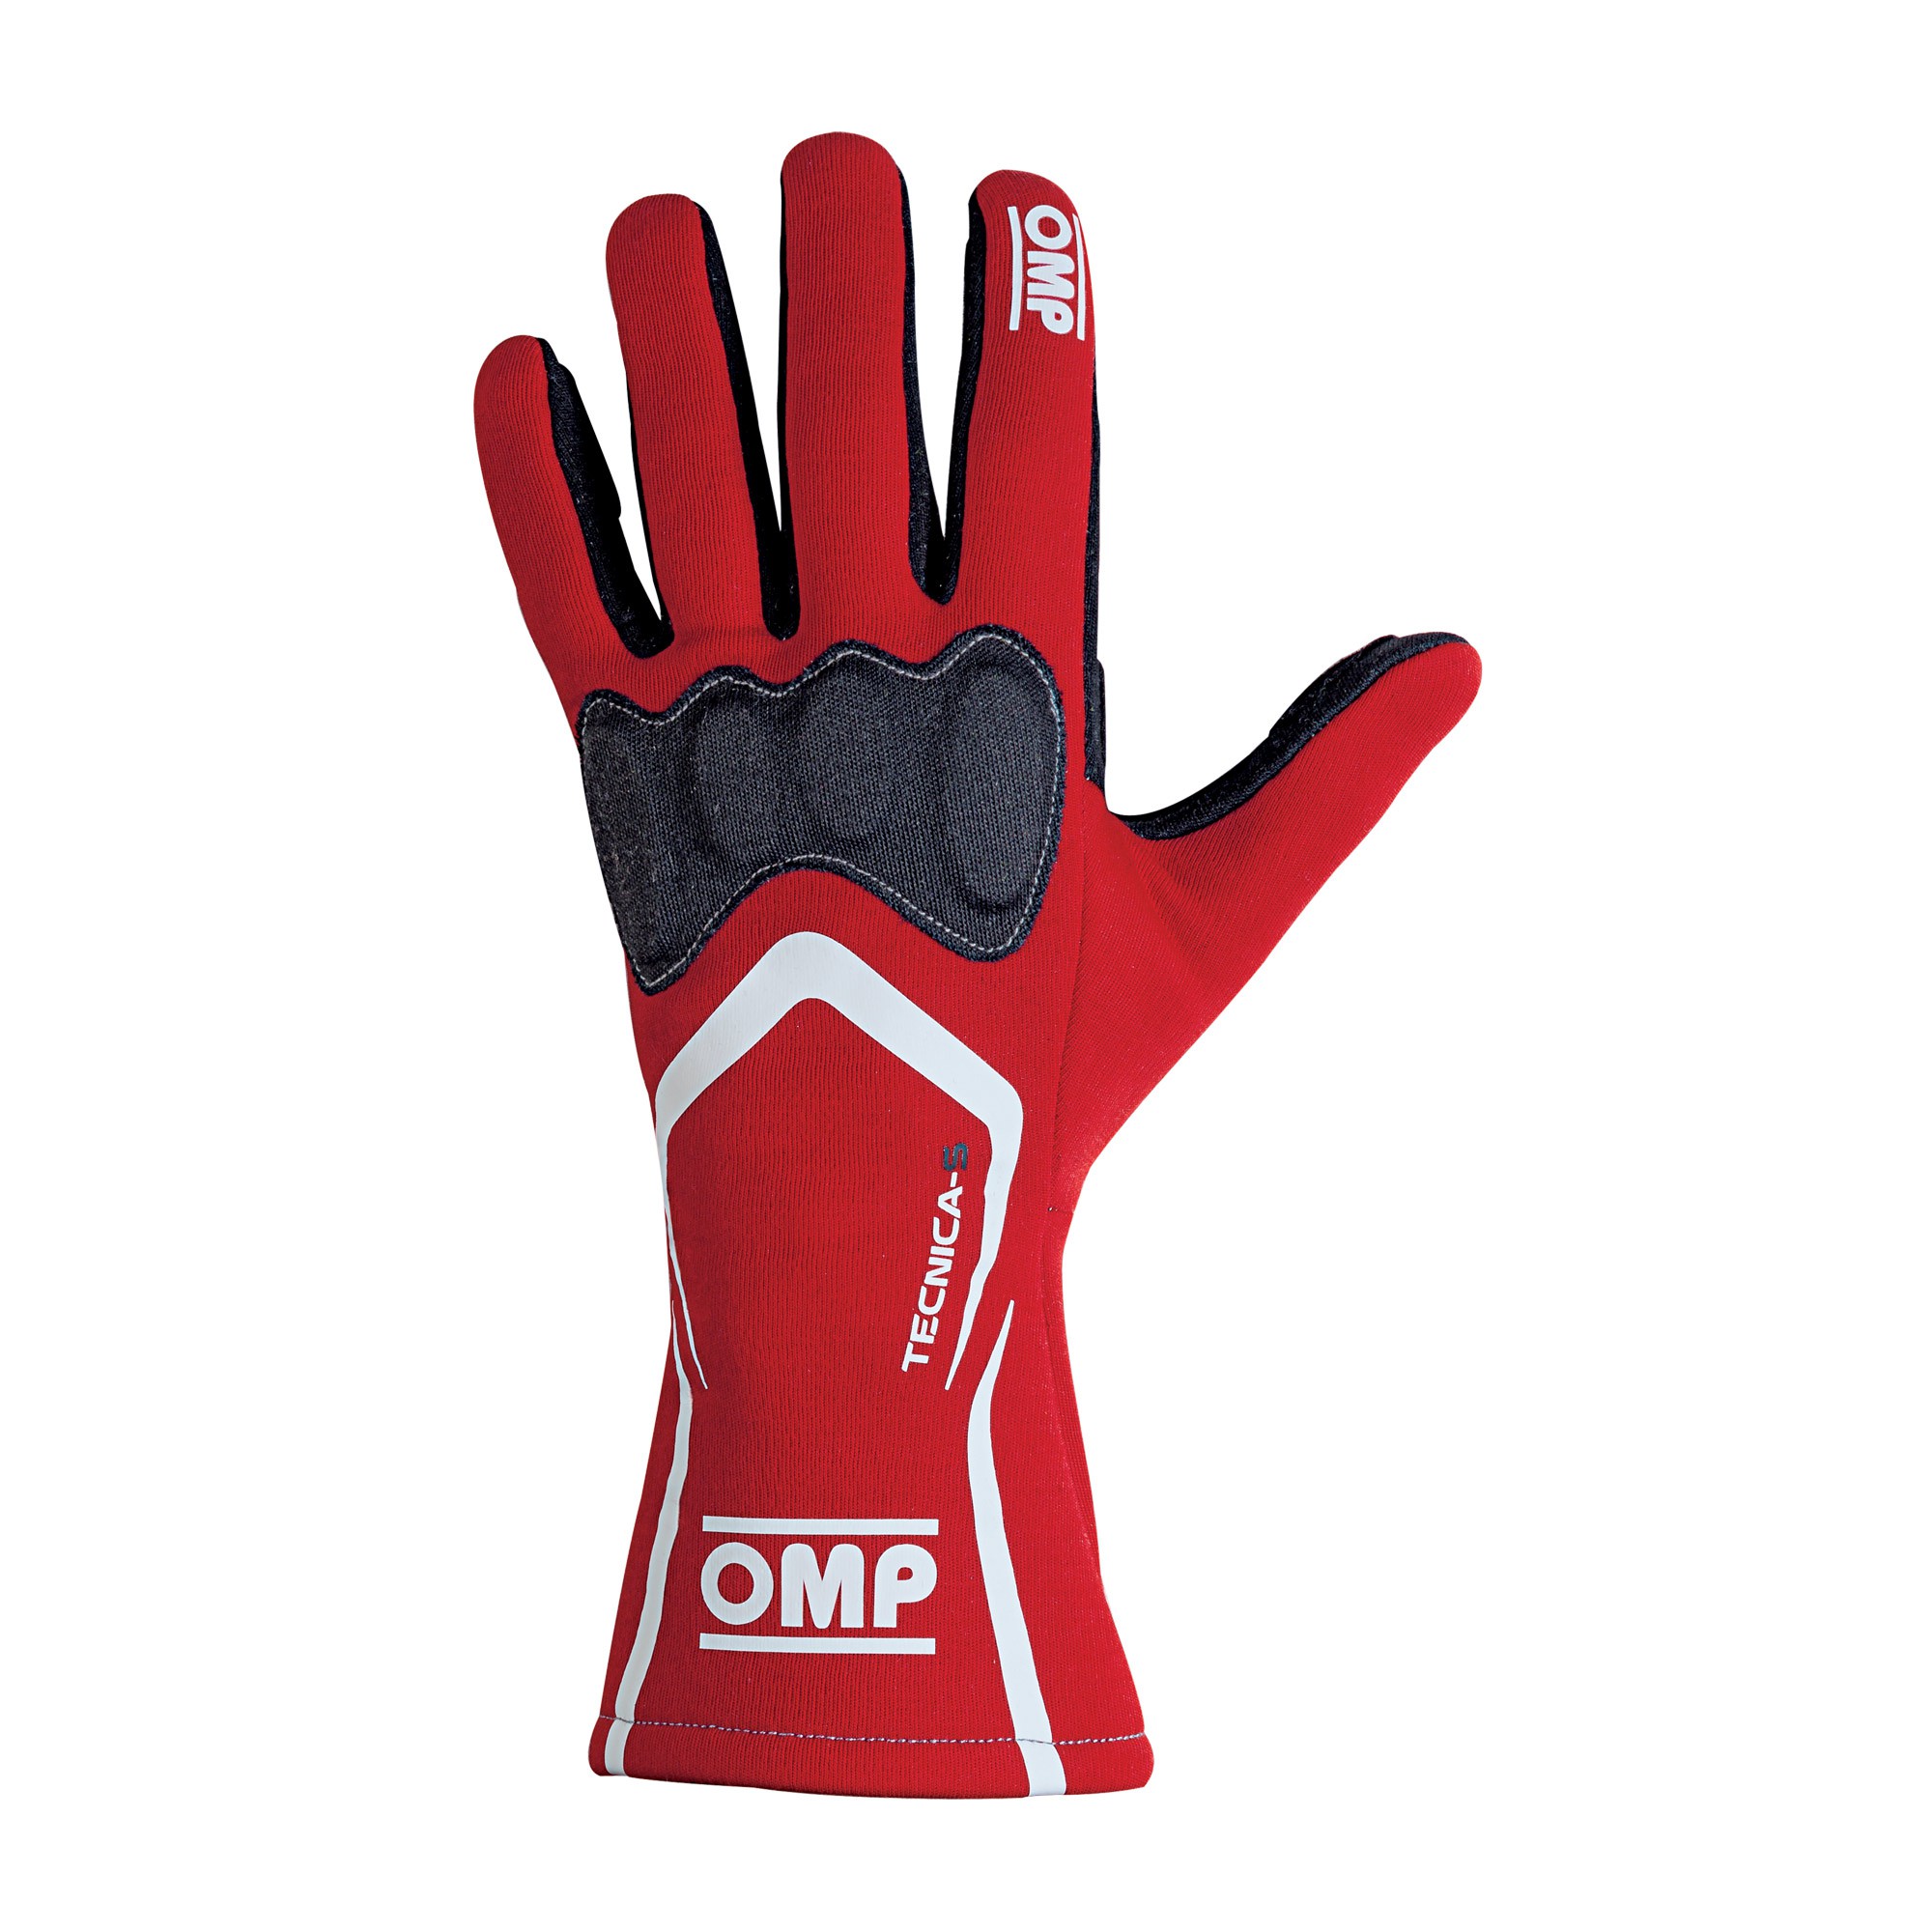 TECNICA-S GLOVES RED SIZE L